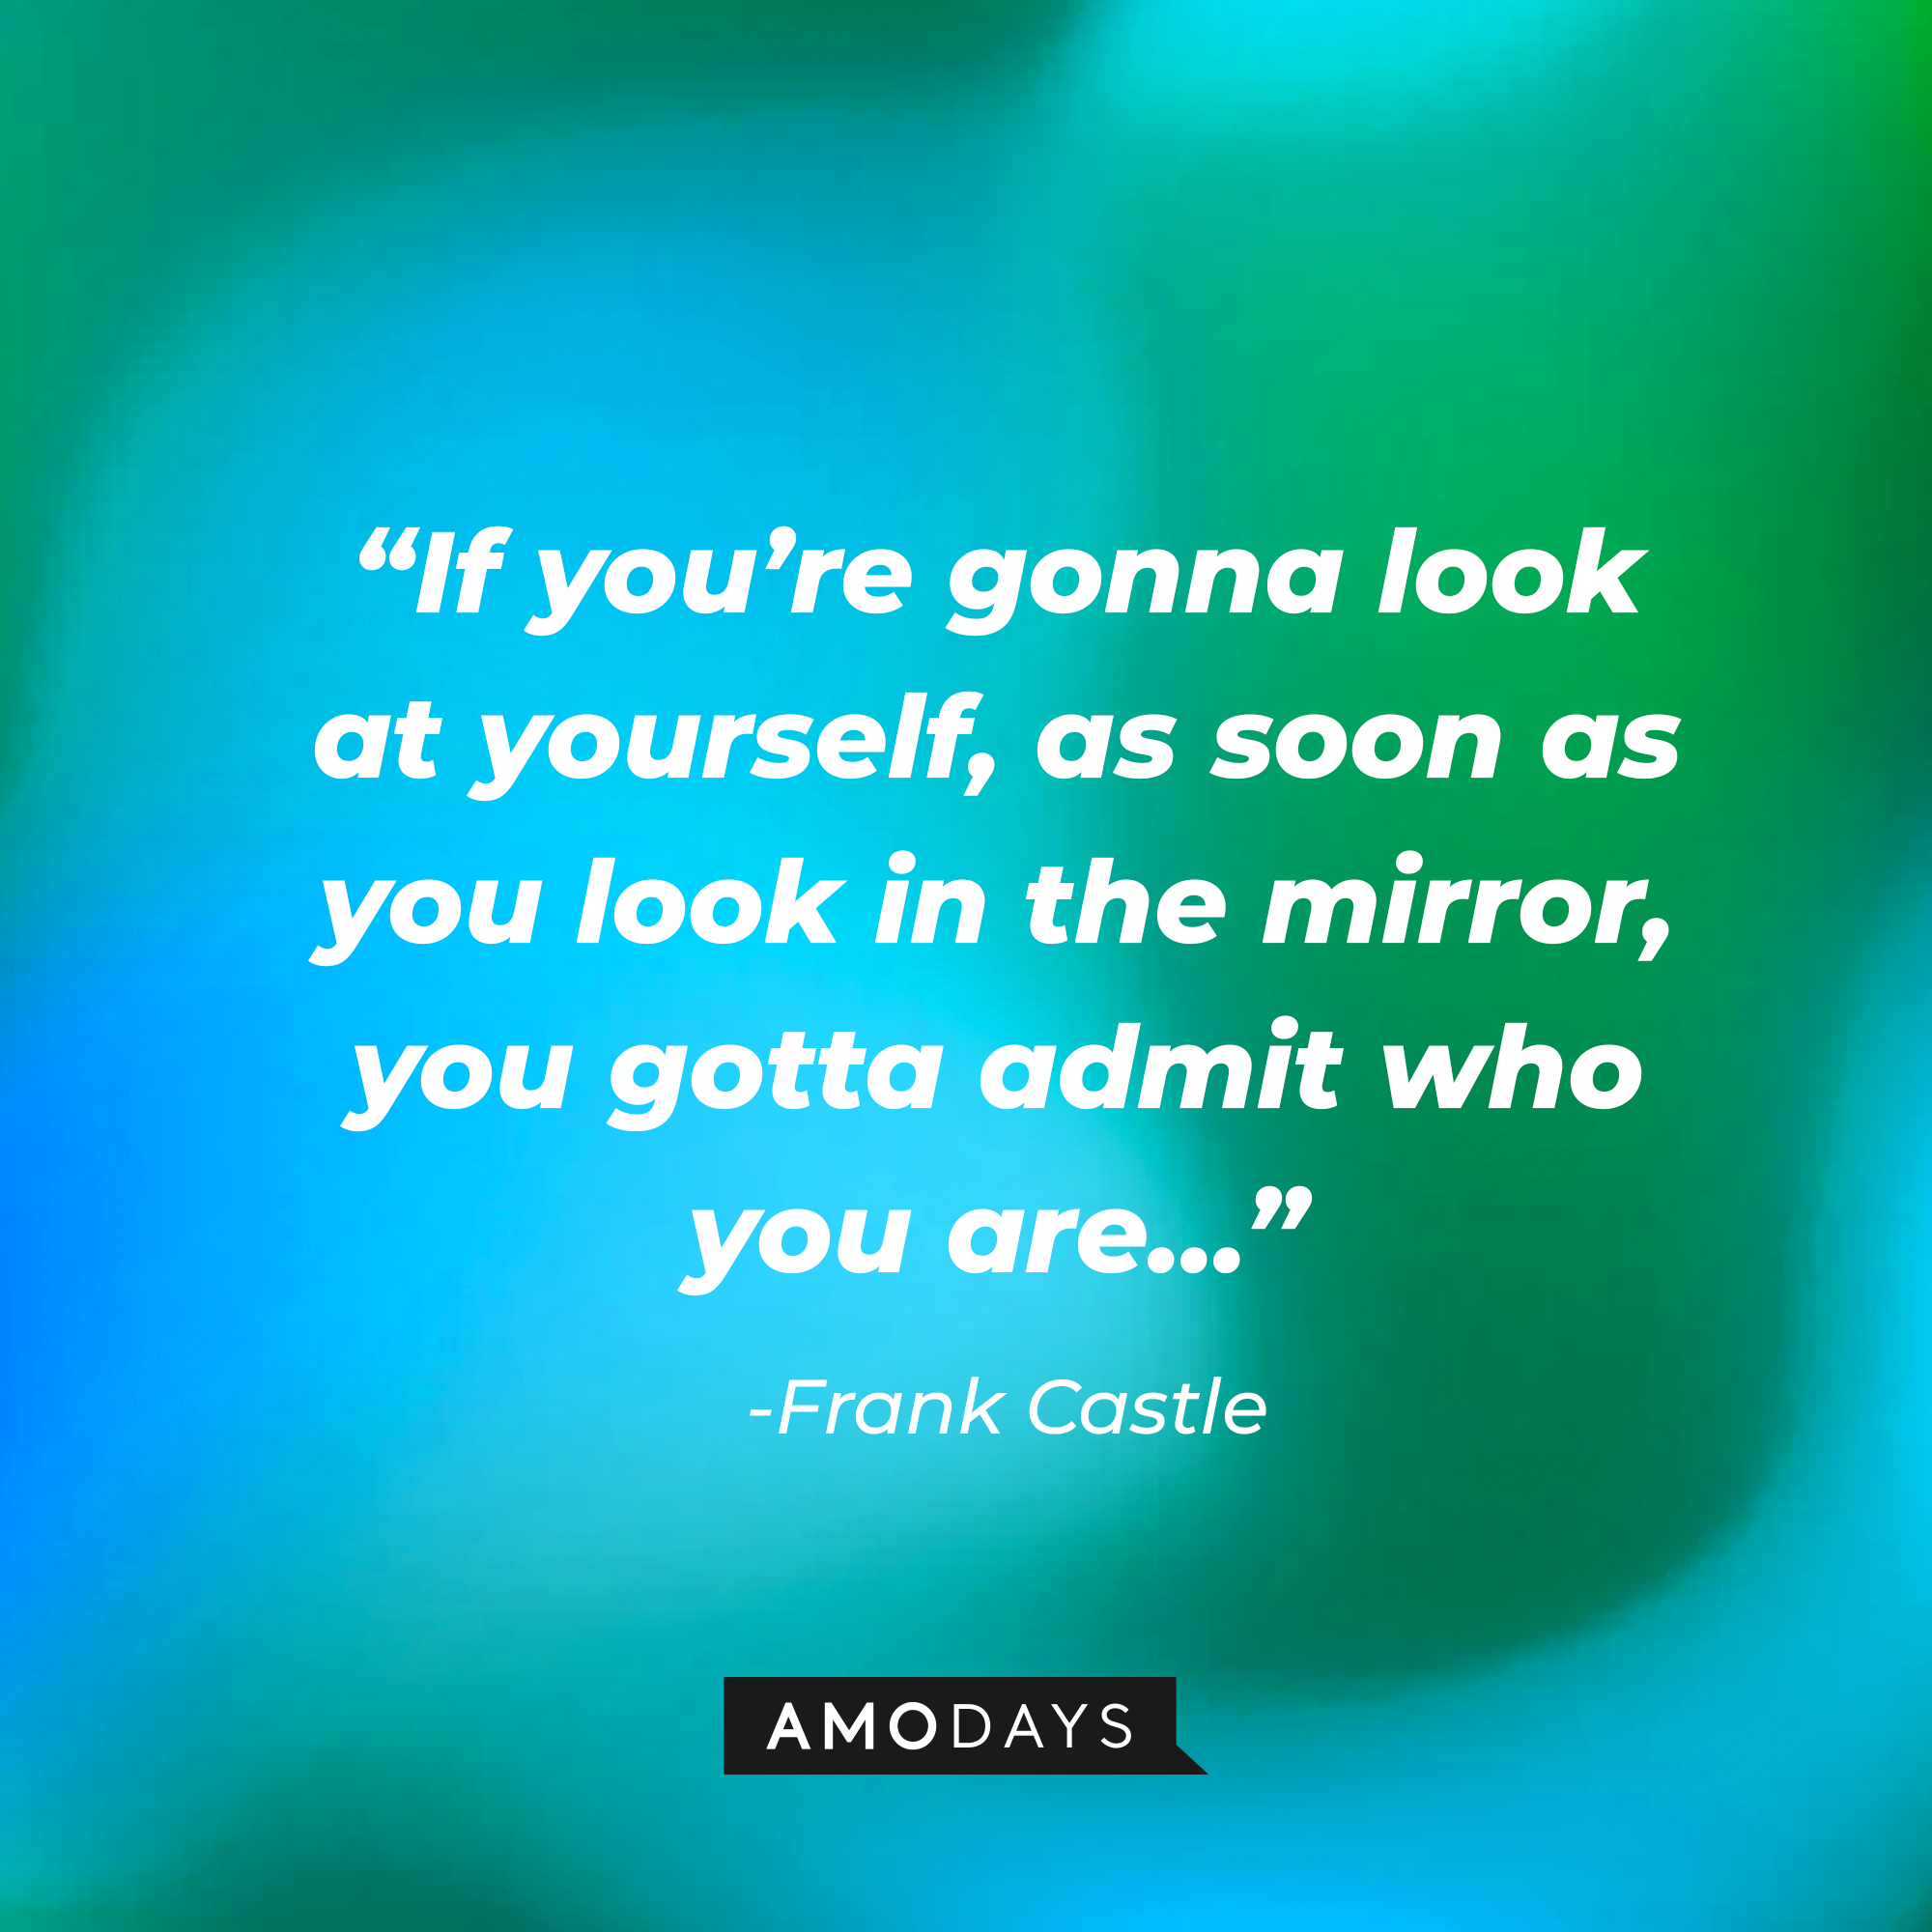 Frank Castle’s quote: “If you’re gonna look at yourself, as soon as you look in the mirror, you gotta admit who you are.” | Source: AmoDays